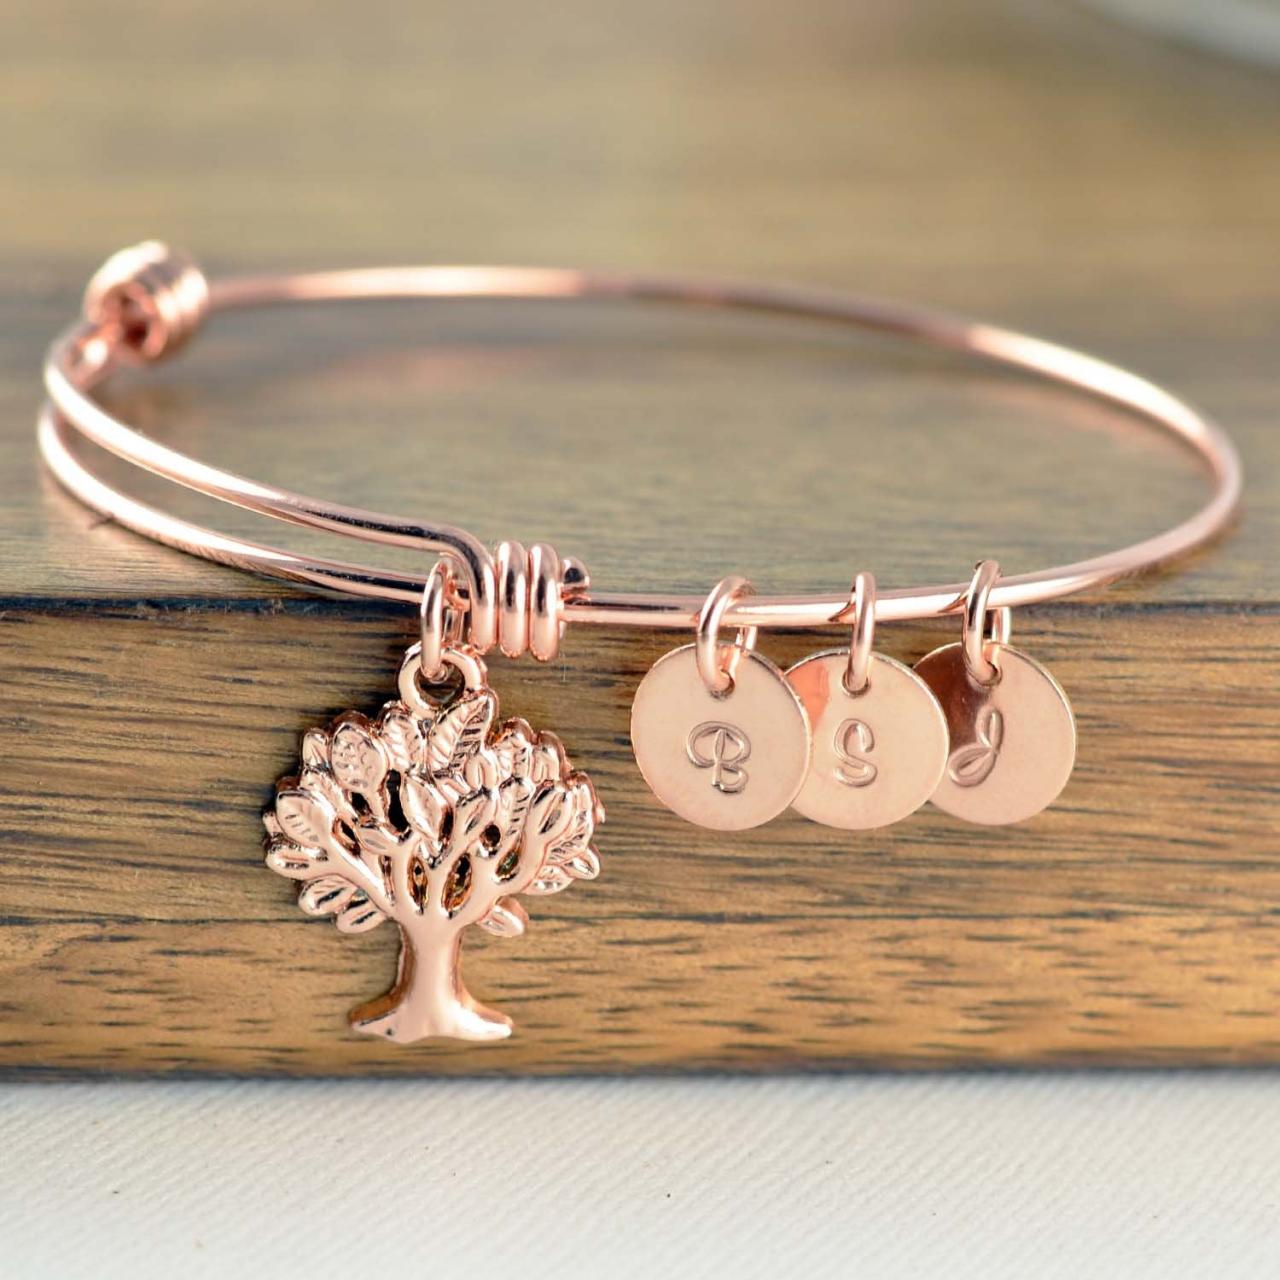 Personalized Bracelet,tree Of Life, Family Tree Jewelry, Grandmother Gift, Gifts For Mom, Mom Gift, Initial Bracelet, Rose Gold Bracelet